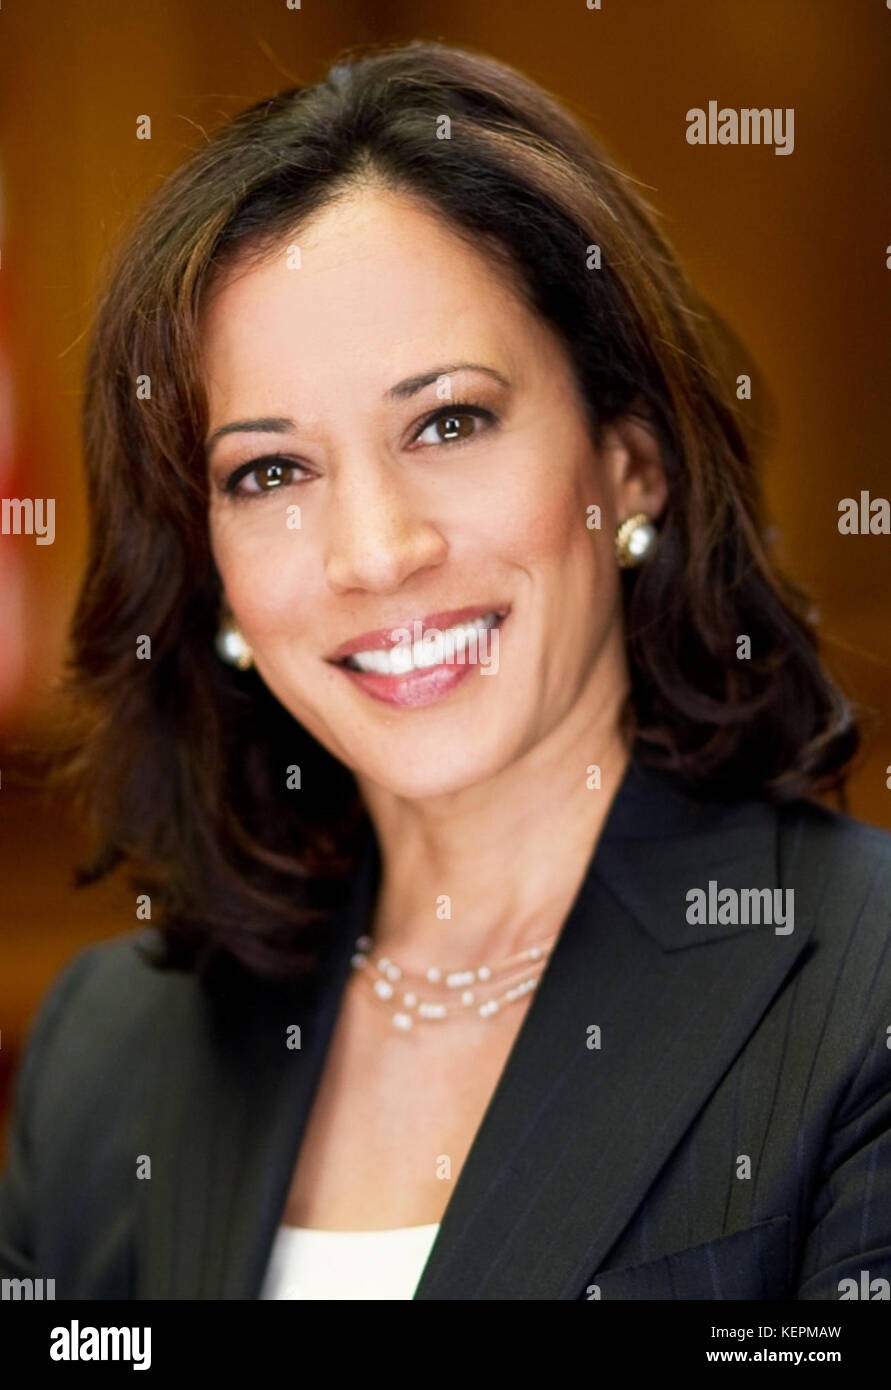 Kamala Harris Official Attorney General Photo (cropped) Stock Photo